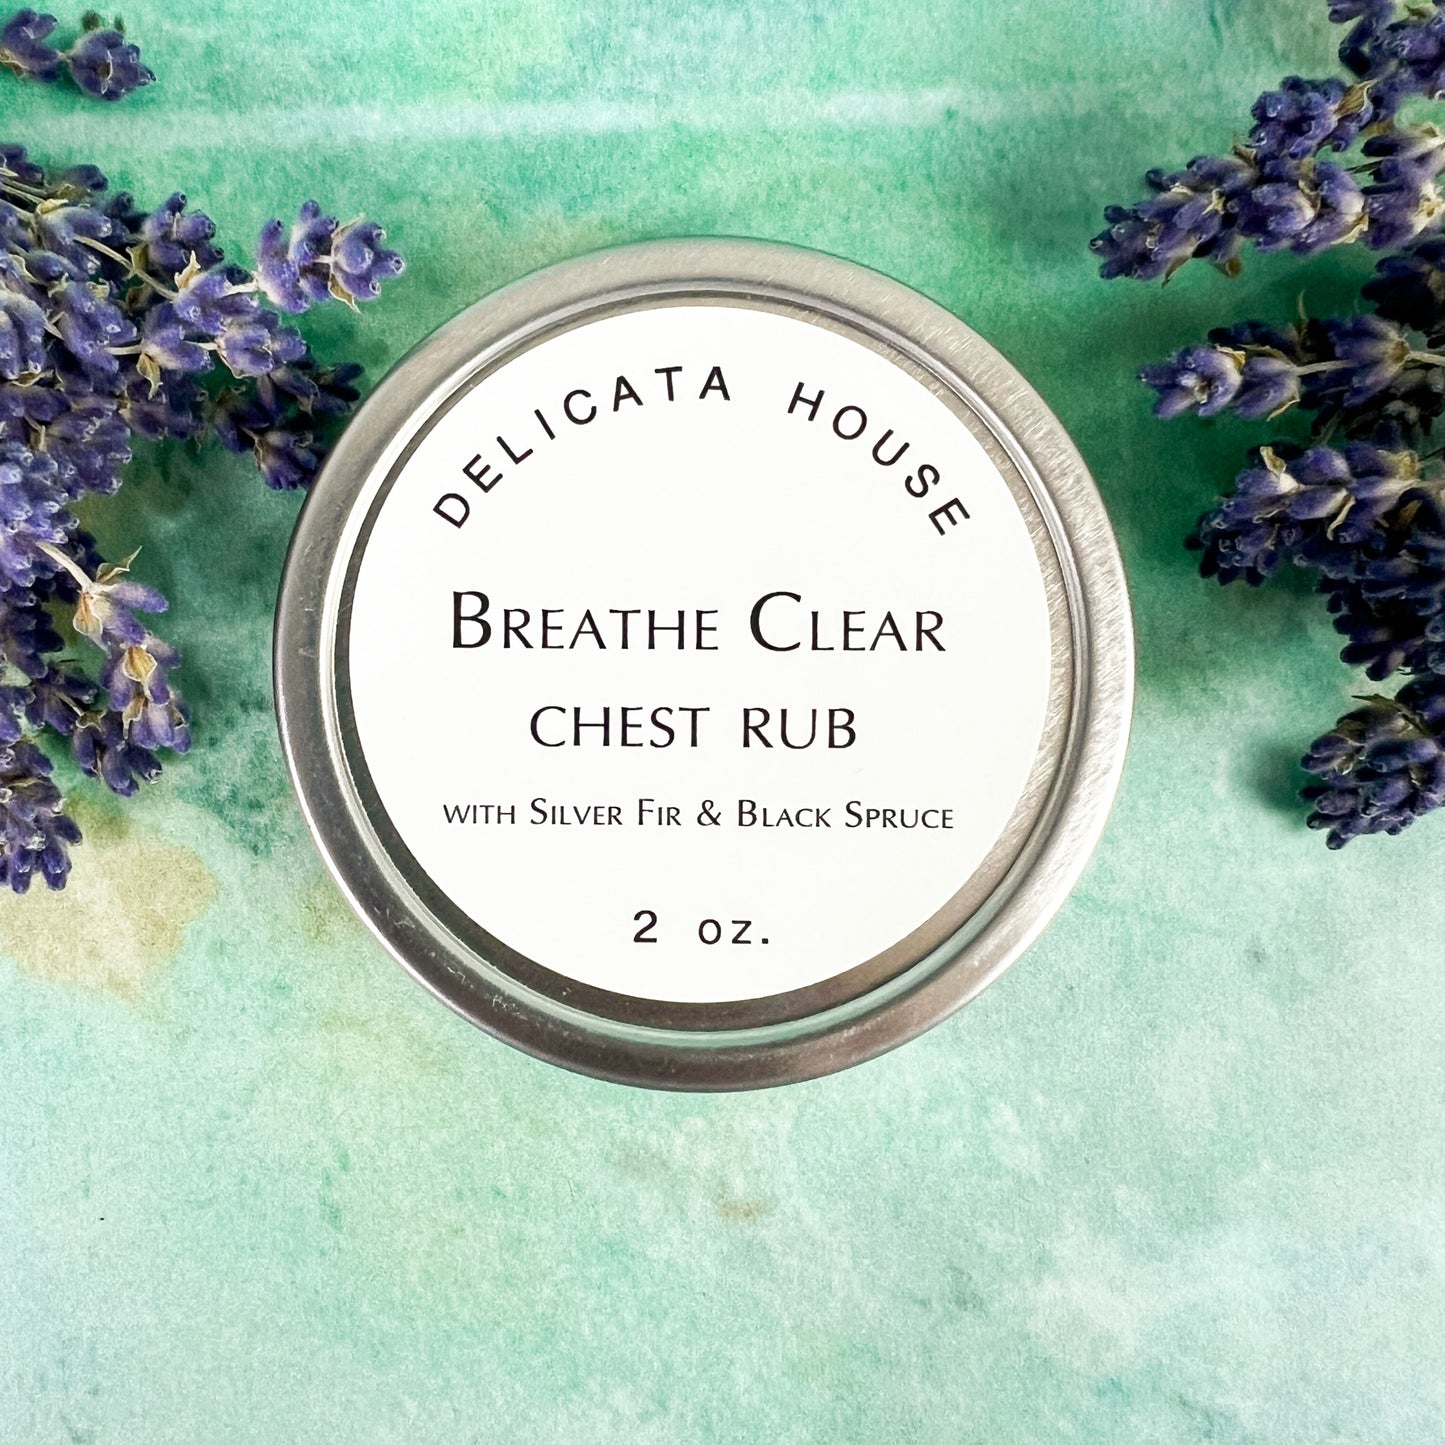 Breathe Clear Chest Rub - Aromatic Chest Rub - Chest Balm with Silver Fir and Black Spruce - Natural Aromatic Decongestant